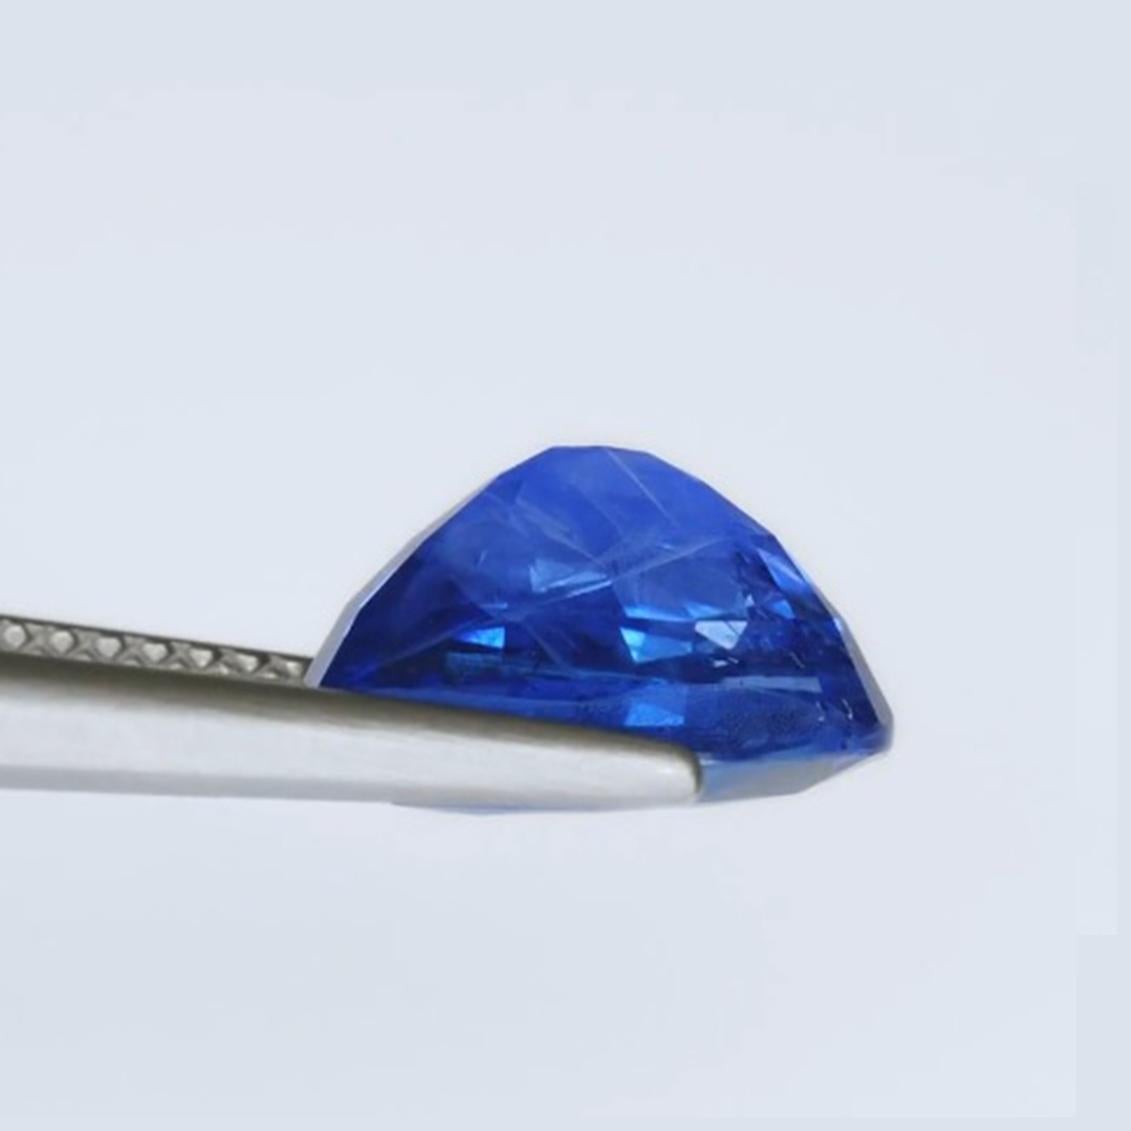 Carat: 4.41 
Item: Blue Sapphire 
Type: Natural 
Shape: Oval 
Origin: Sri Lanka 
Color: Cornflower
Size: 10.84X7.37X6.46
Certificate: GRS 2019-047177

Experience the allure of true luxury with our GRS Certified 4.41ct Blue Sapphire stone, a